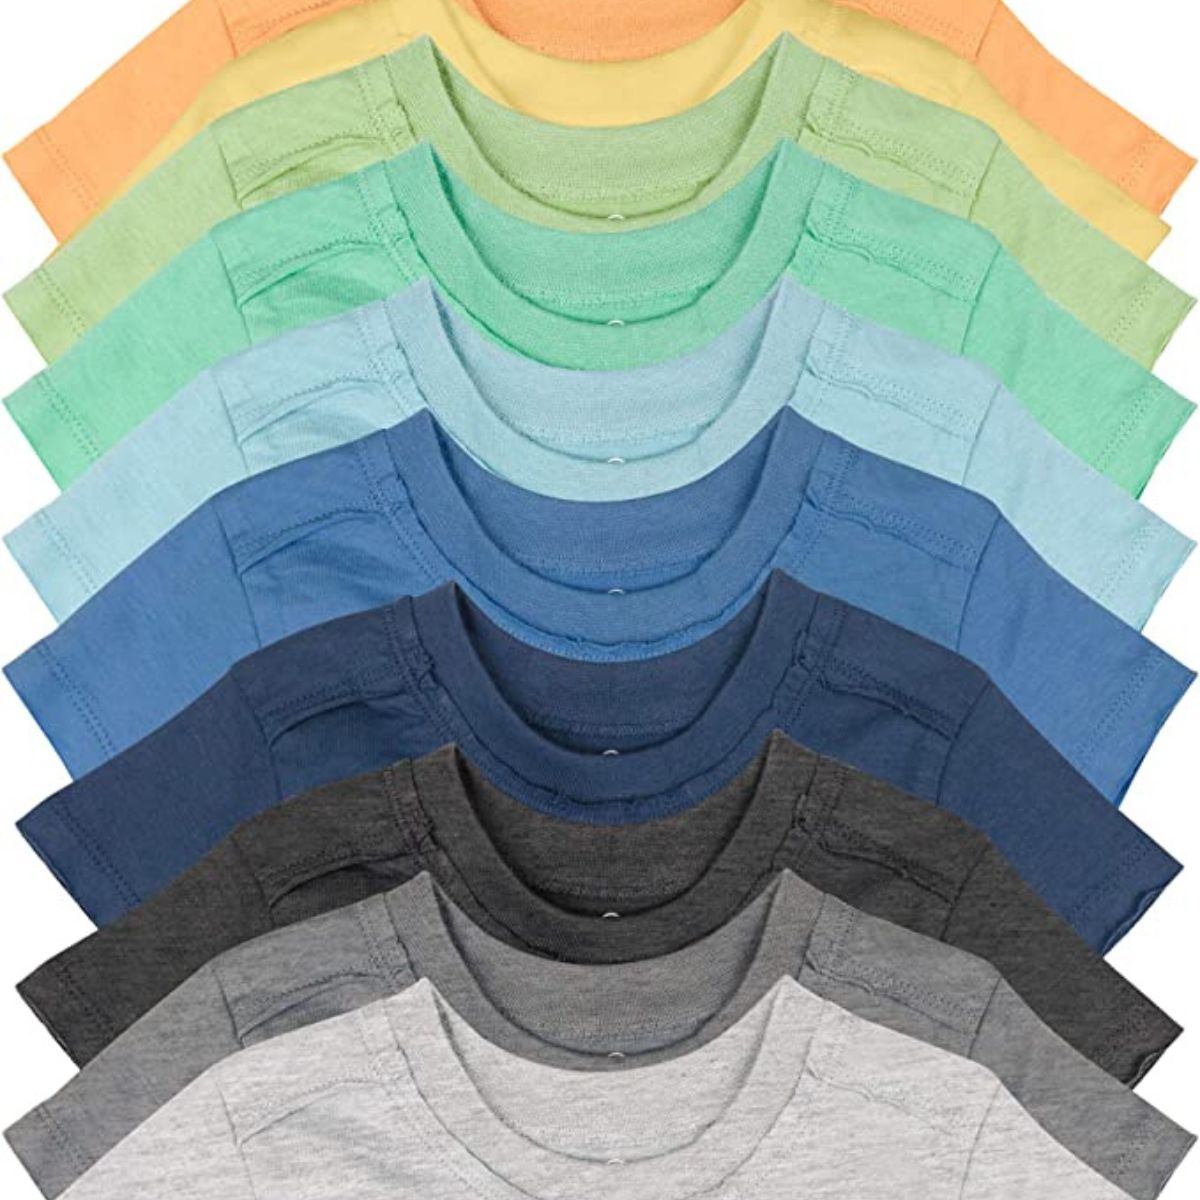 HonestBaby 10-pack of boys organic cotton tees in rainbow colors